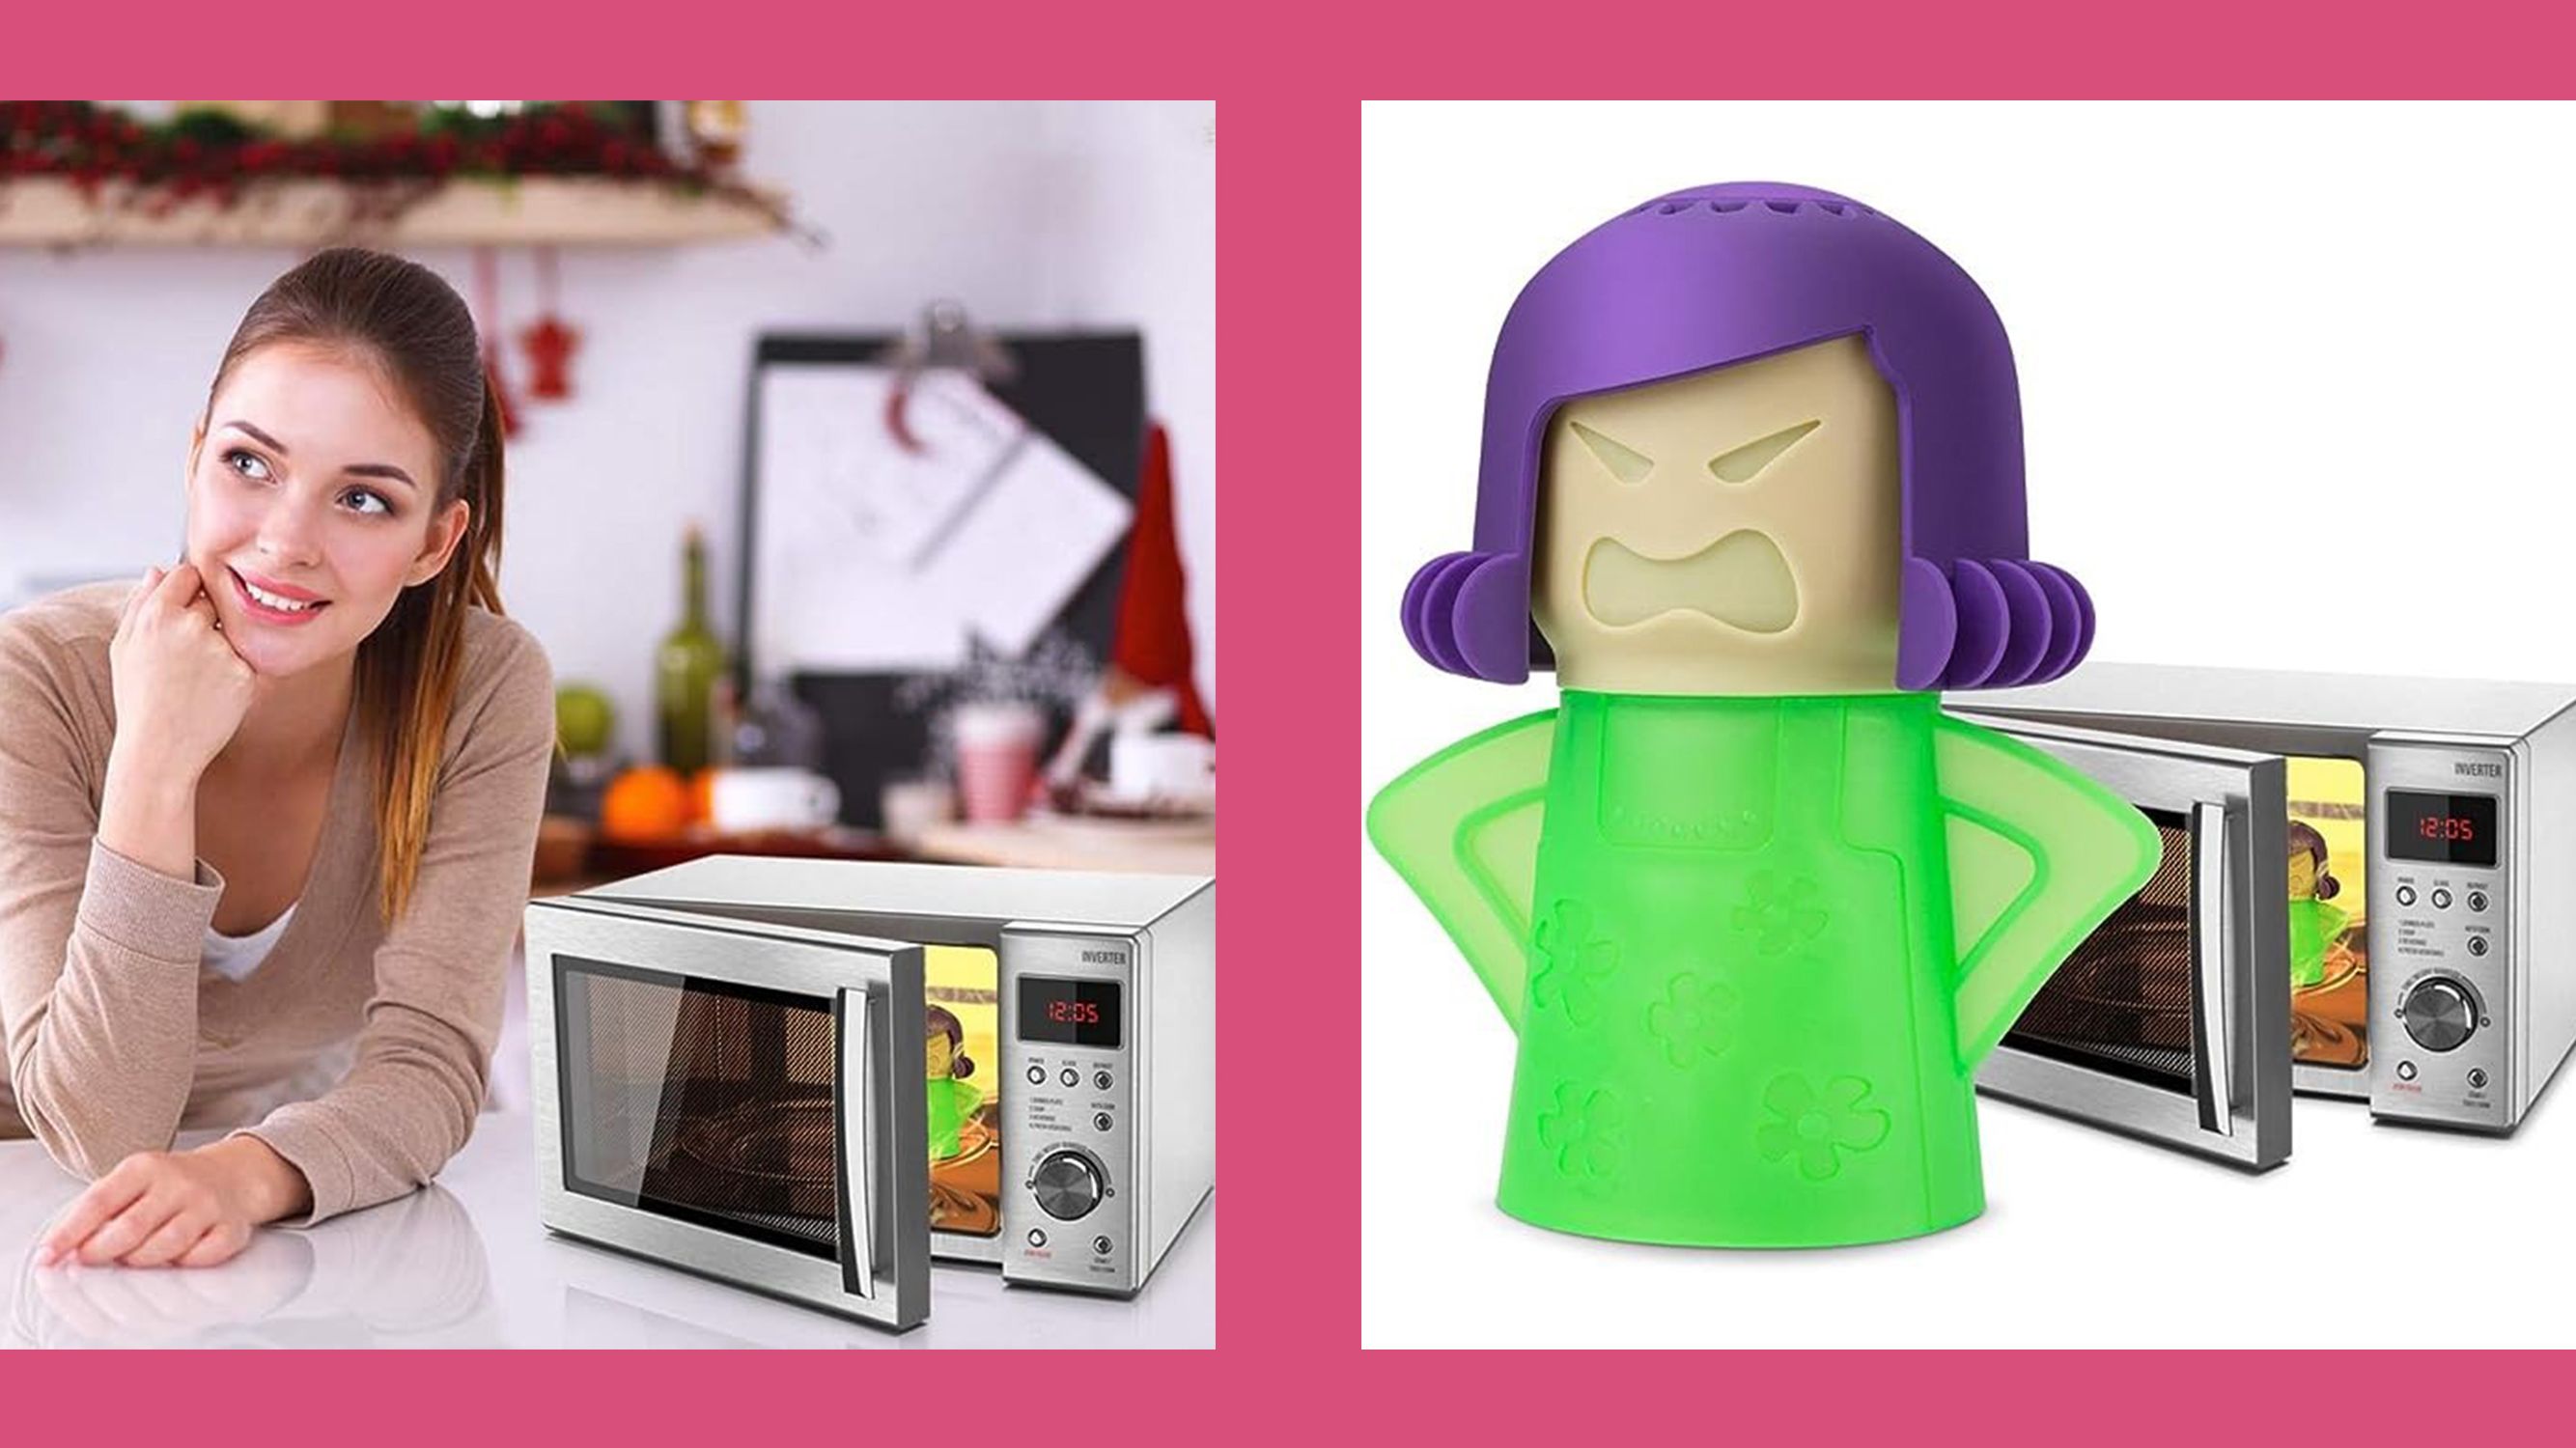 How to Clean a Microwave with Angry Mama